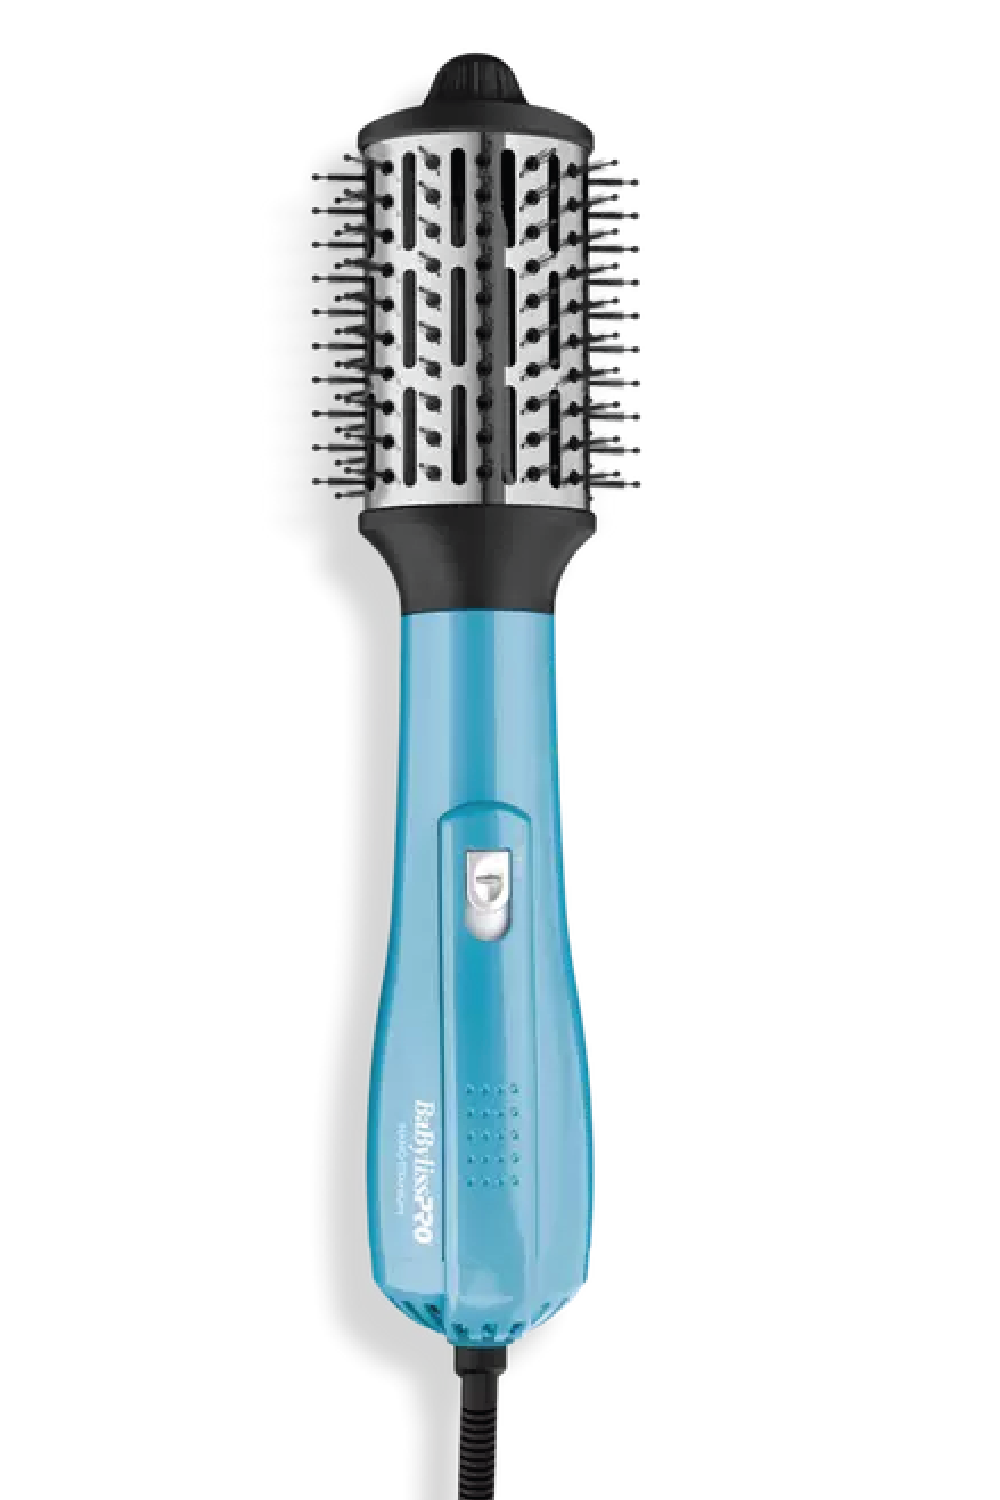 15 Best Hair Dryer Brushes To Style Your Hair in 2023